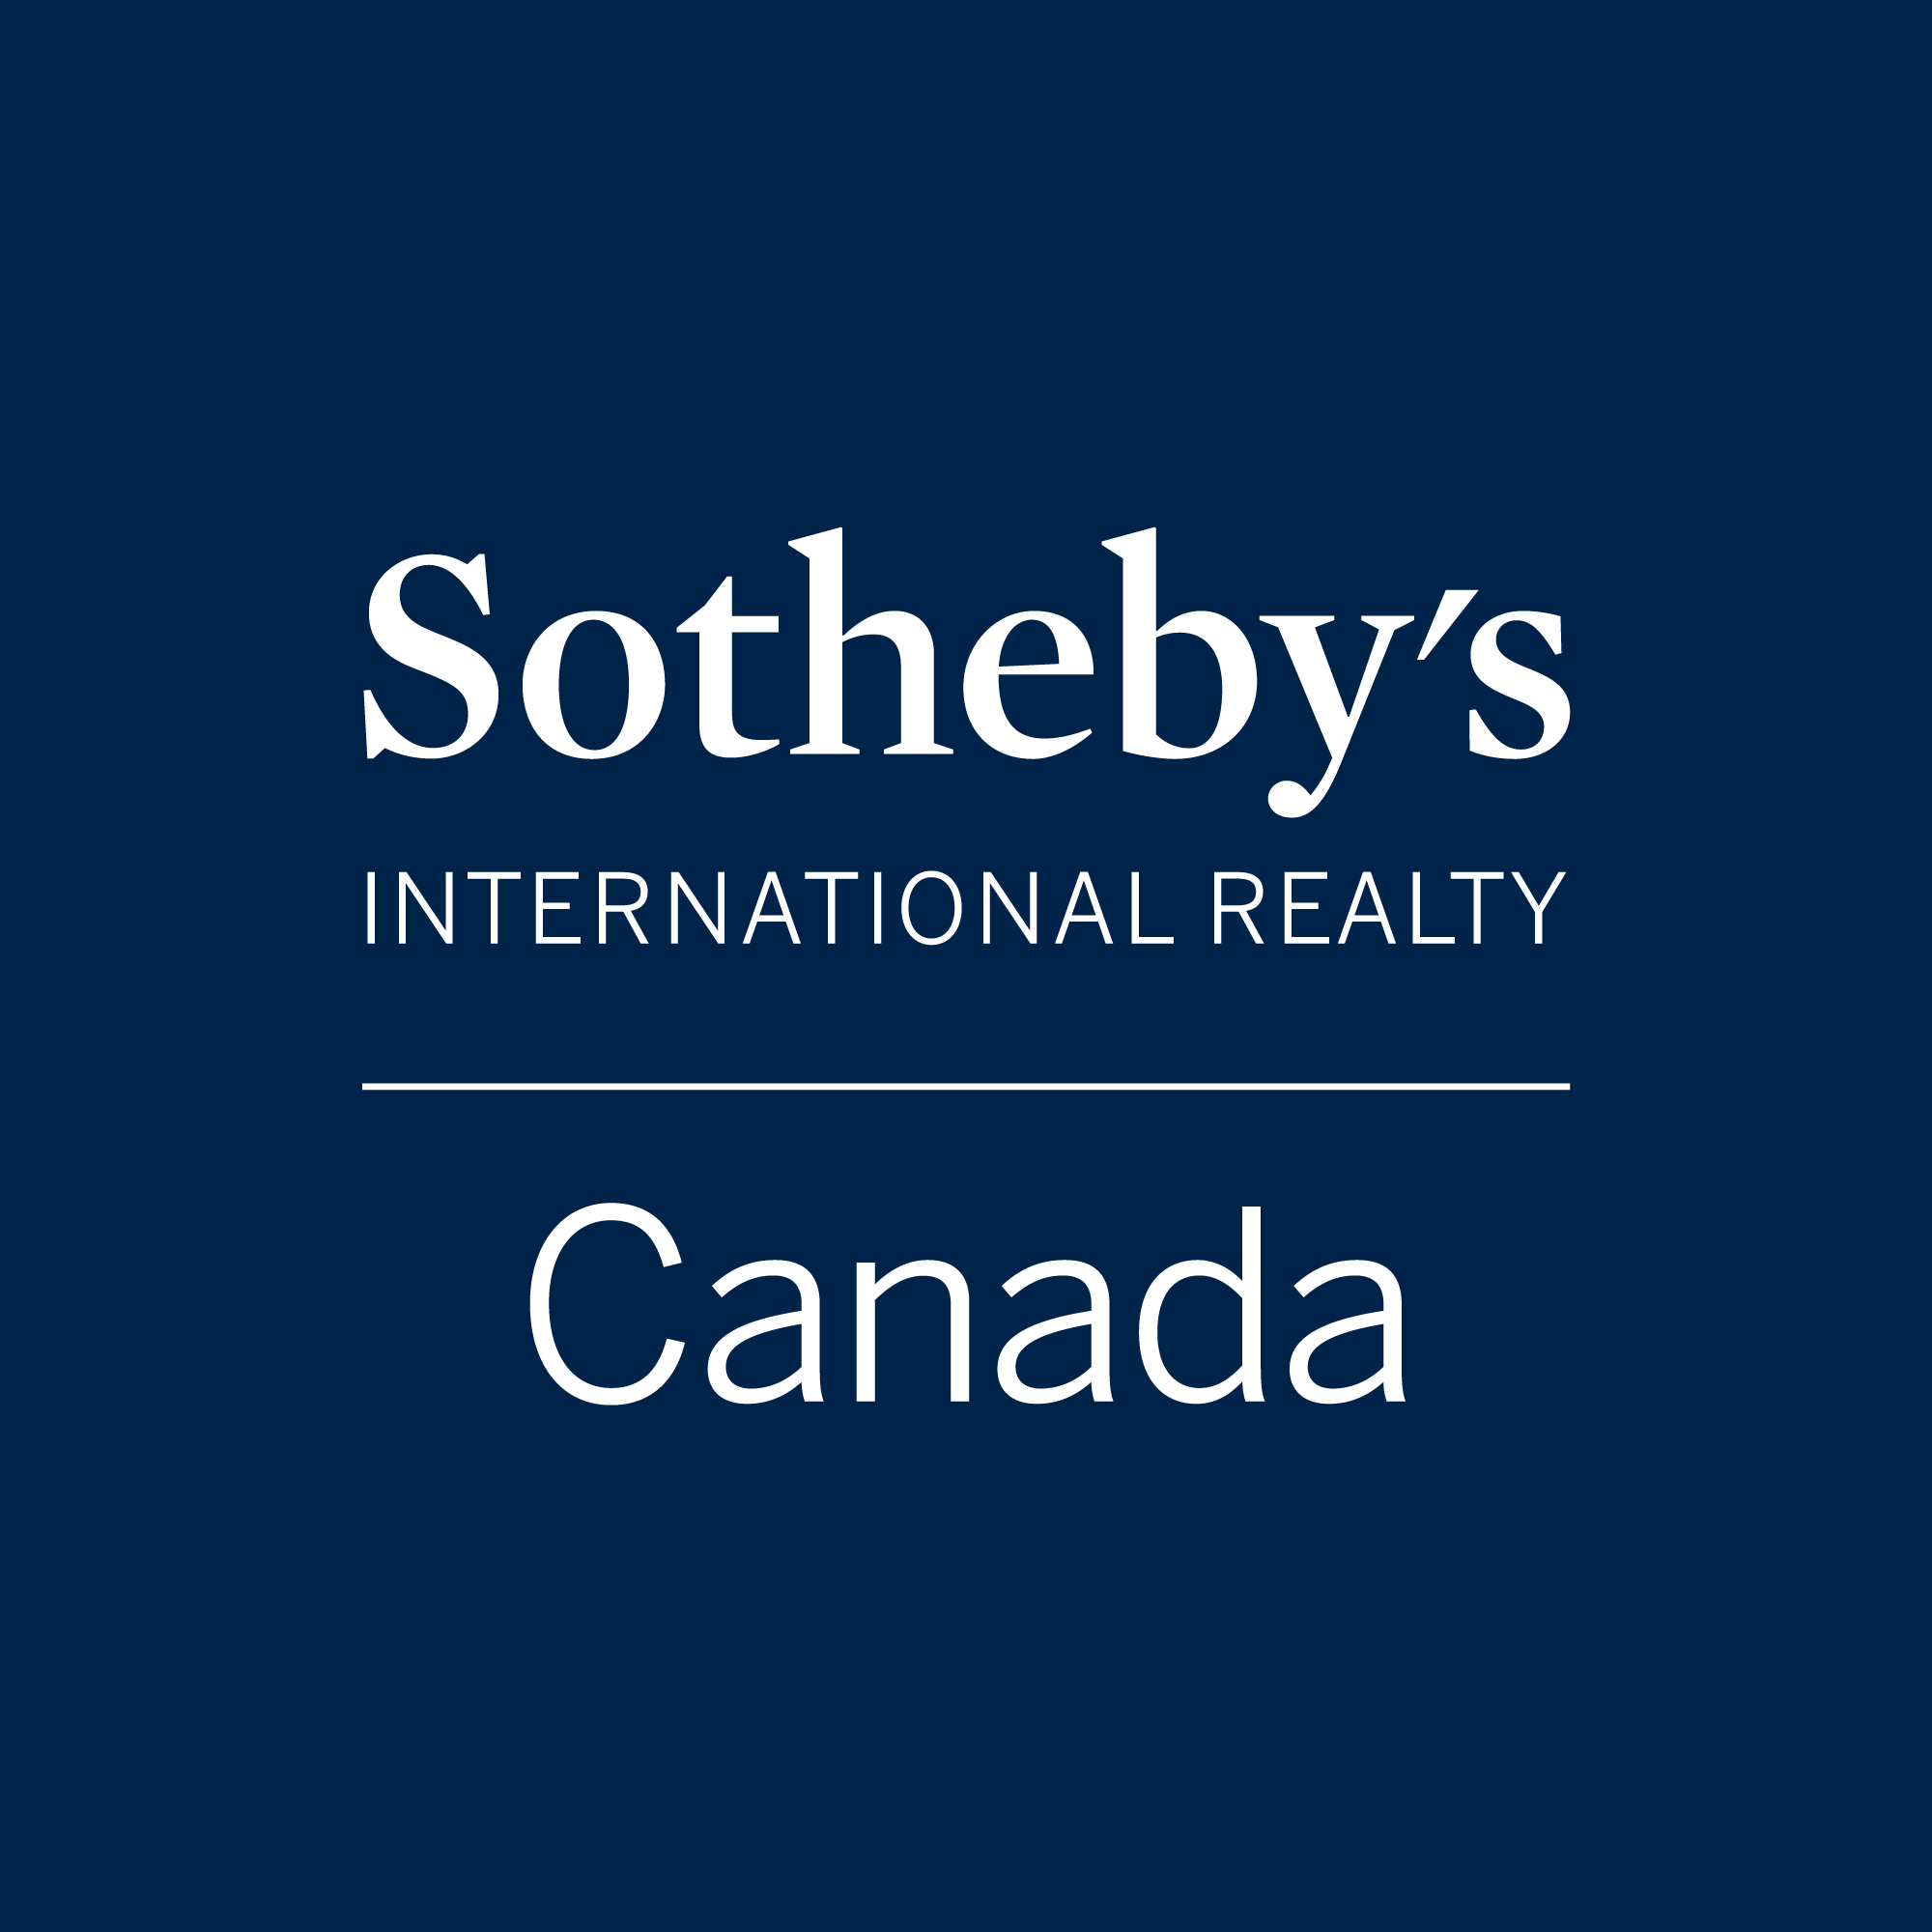 Sotheby's International Realty Canada - Real Estate Investment